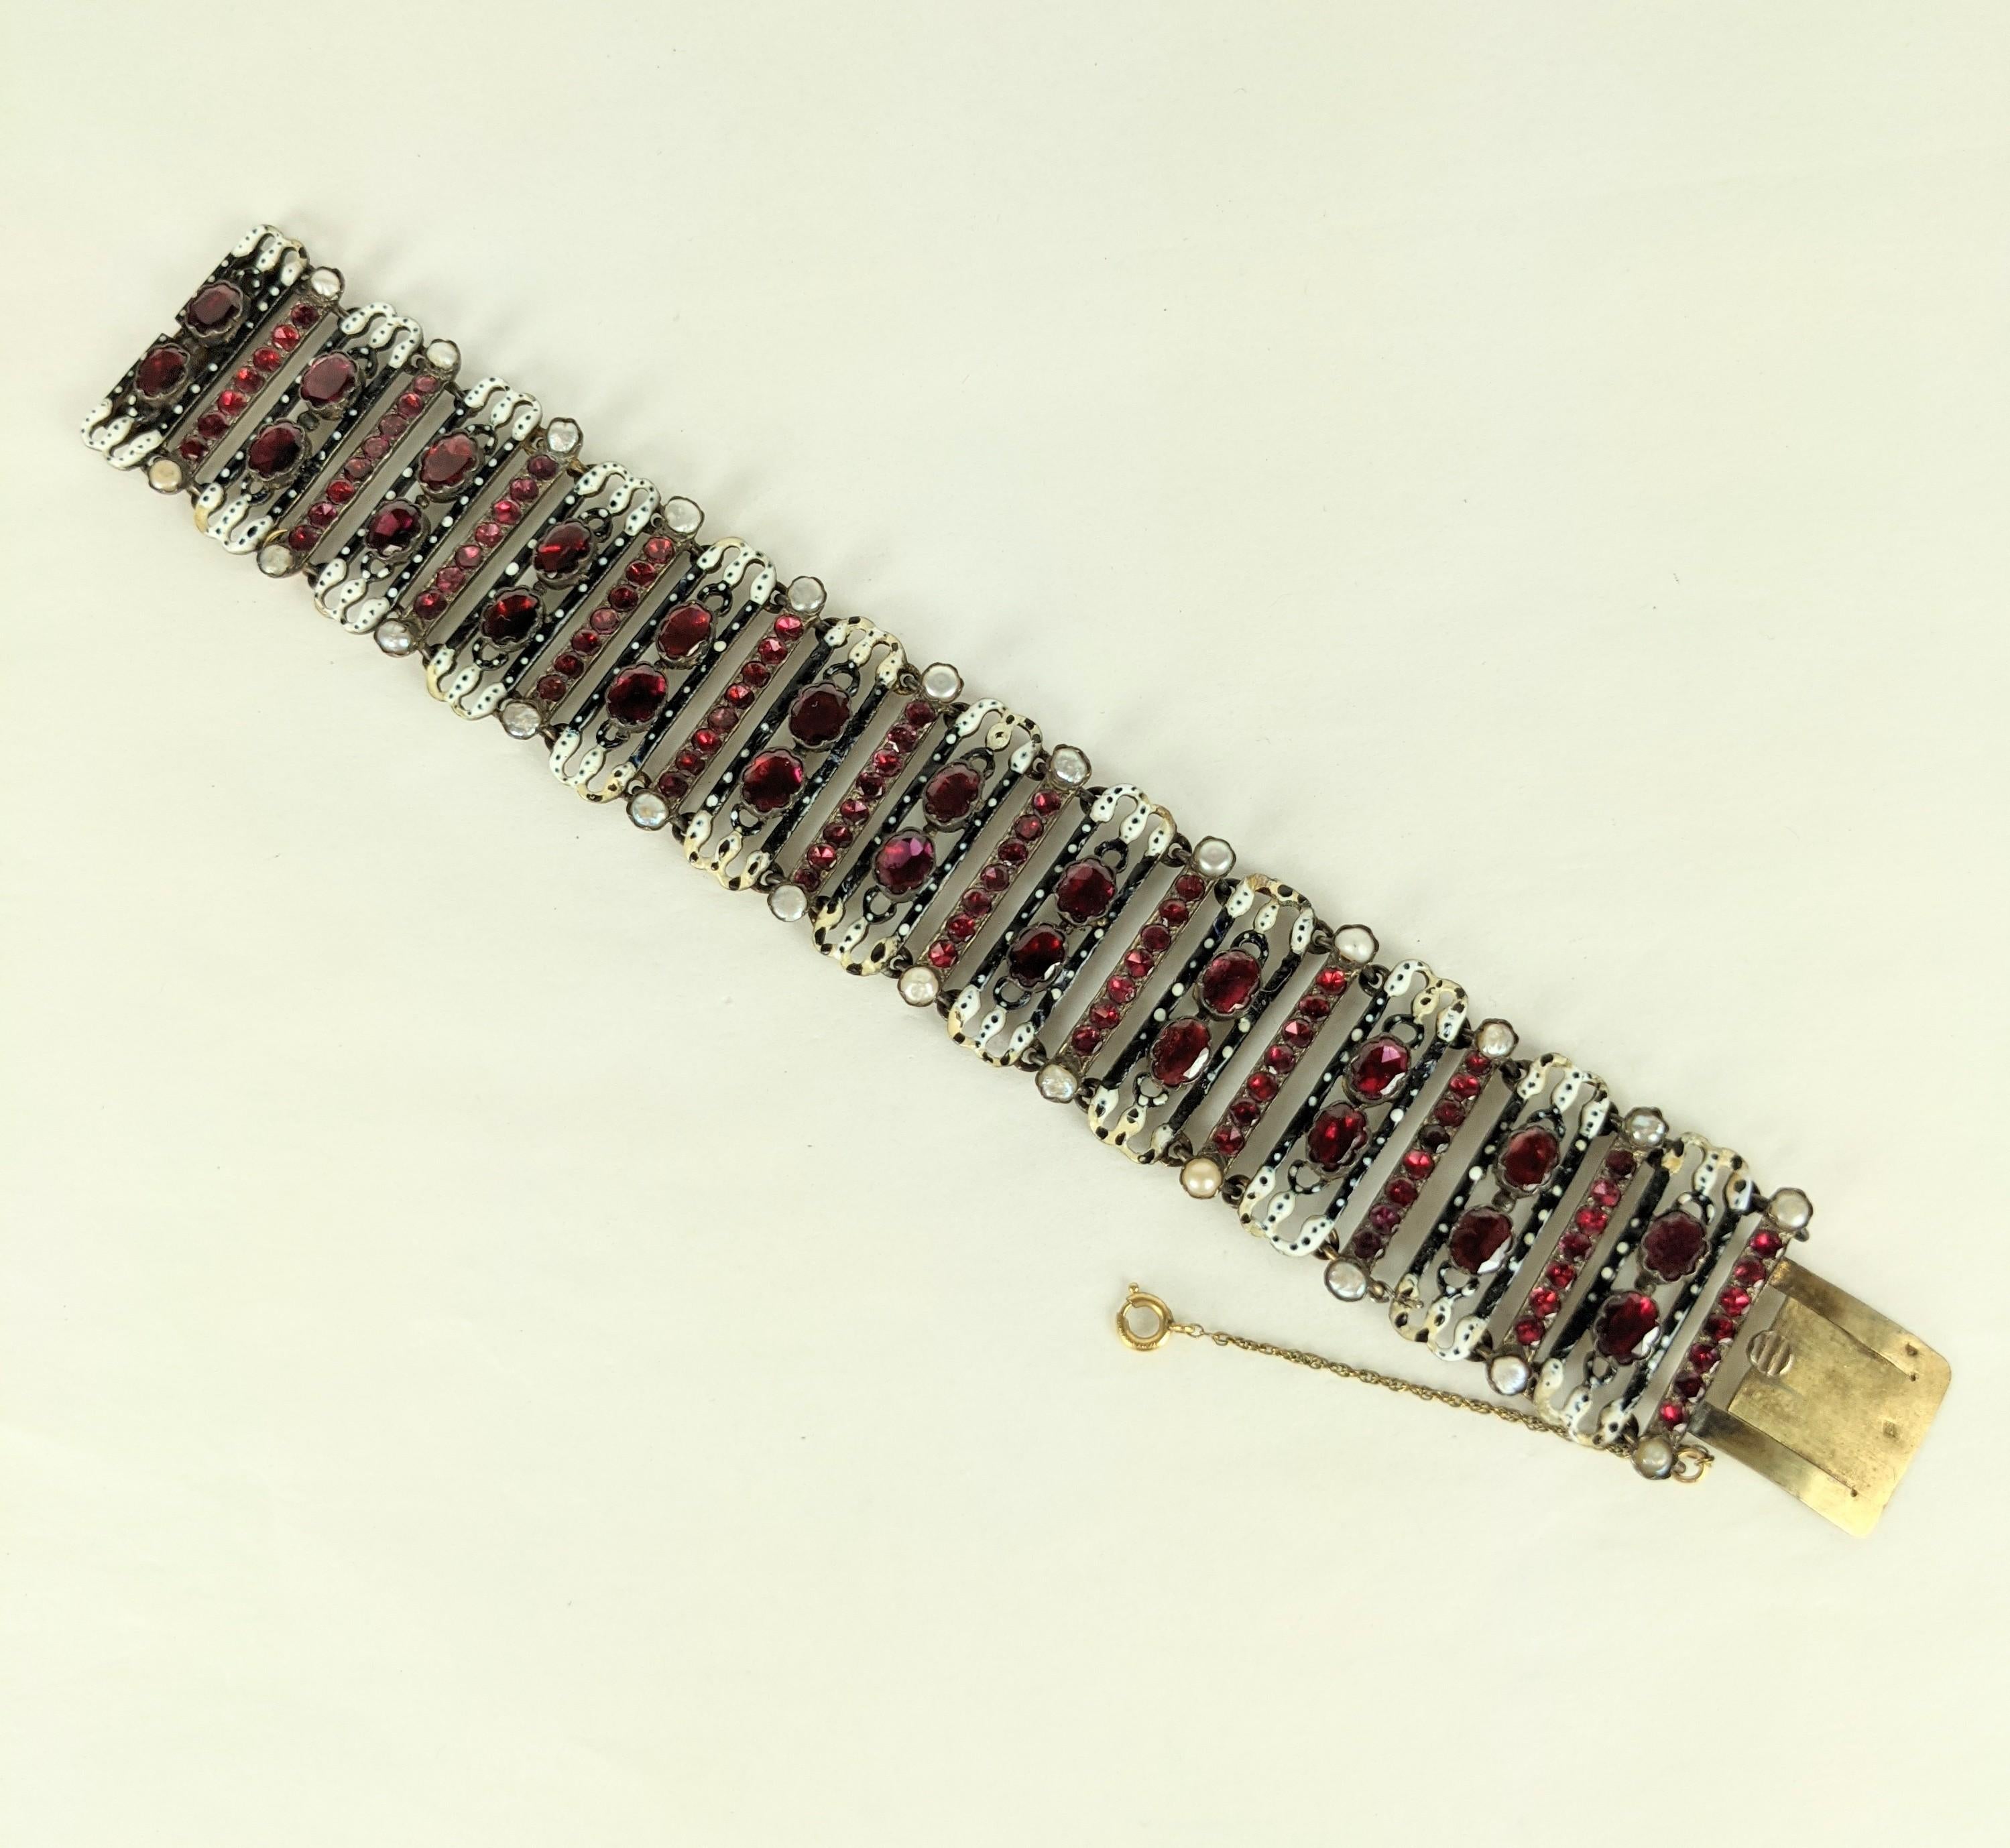 Exceptional French Garnet and Enamel 19th Century Bracelet of fine enamel, foiled back garnets with natural pearls. French manufacture with appropriate hallmarks of silver.  1850's France. Beautiful quality 19th Century jewel. 7